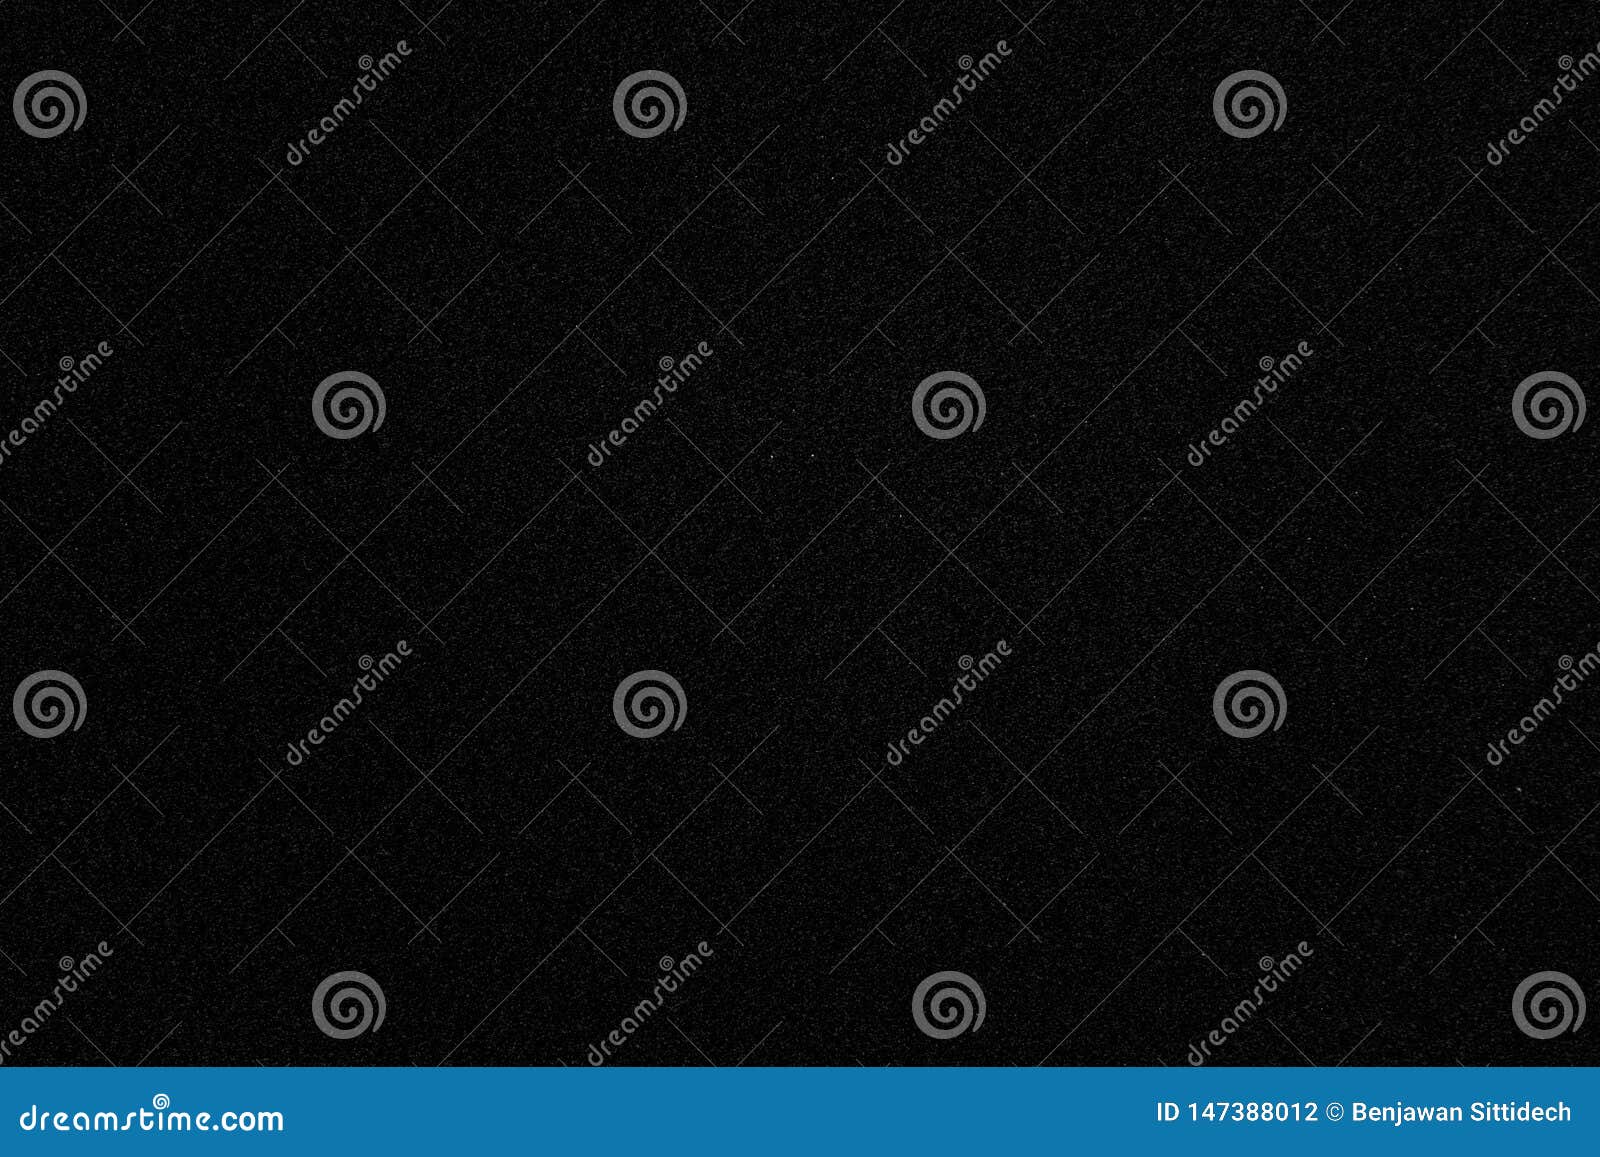 abstract black grainy paper texture background